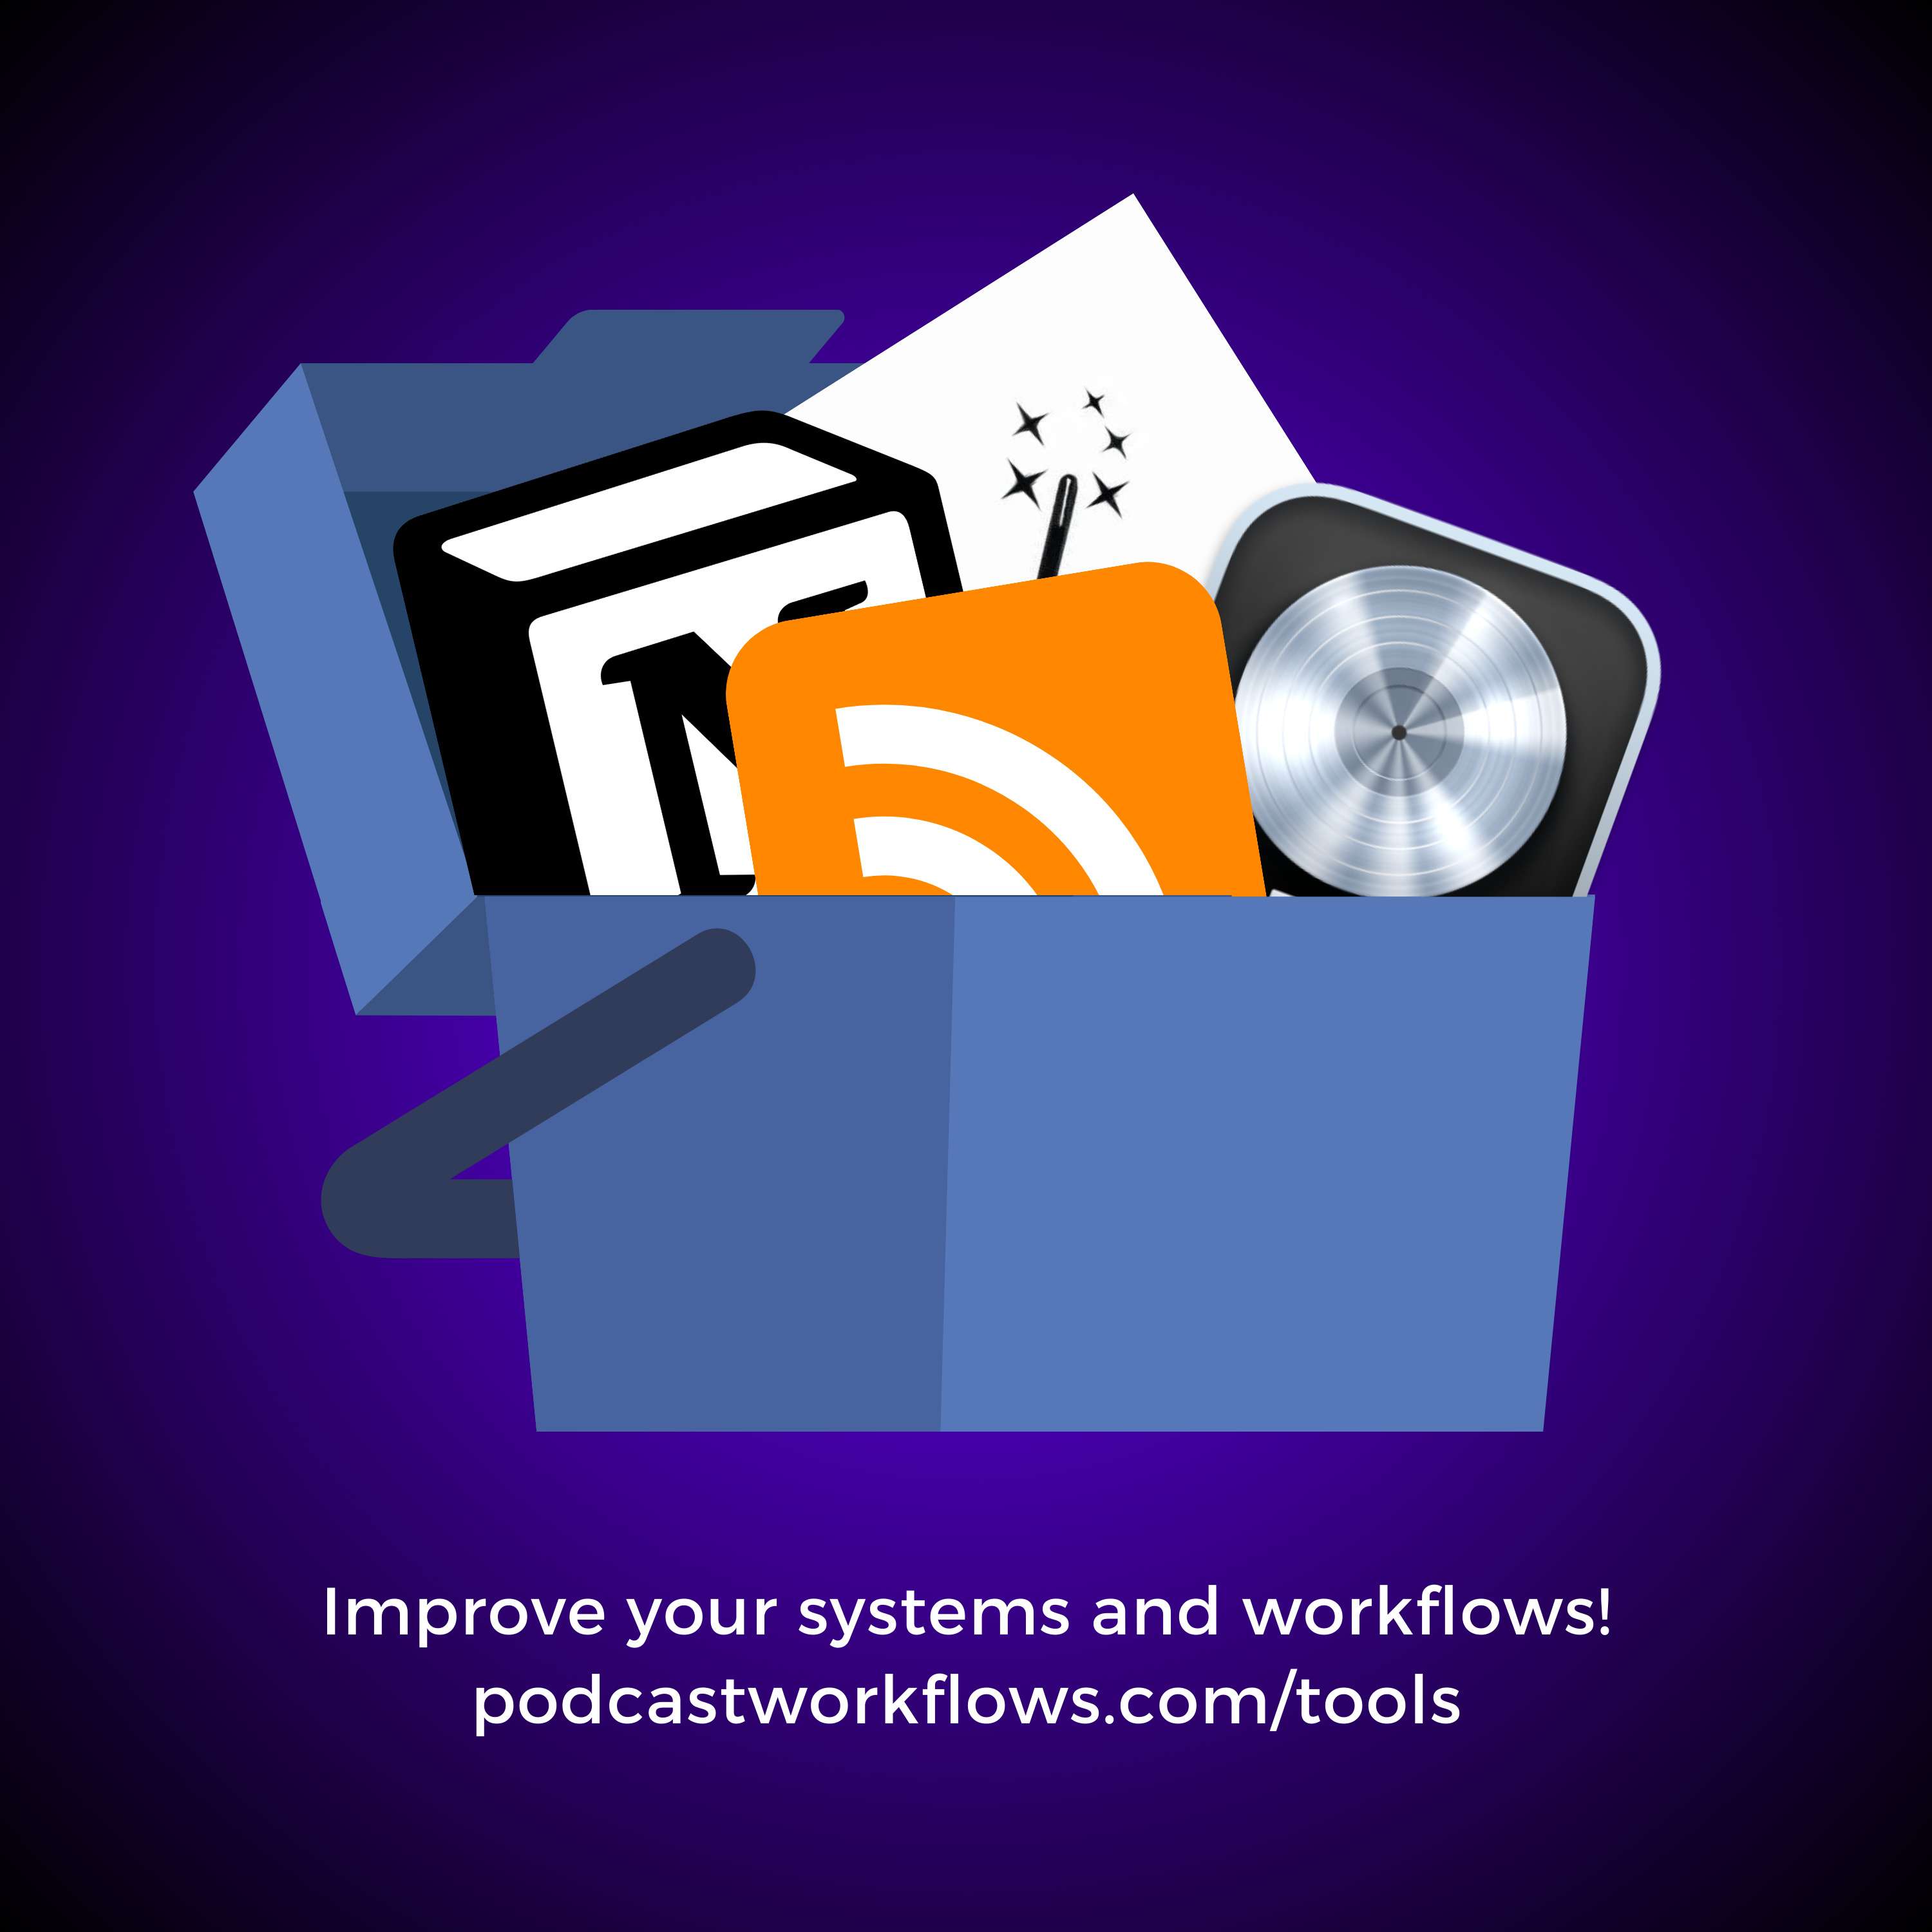 The Tools for Podcasters Guide is Live!